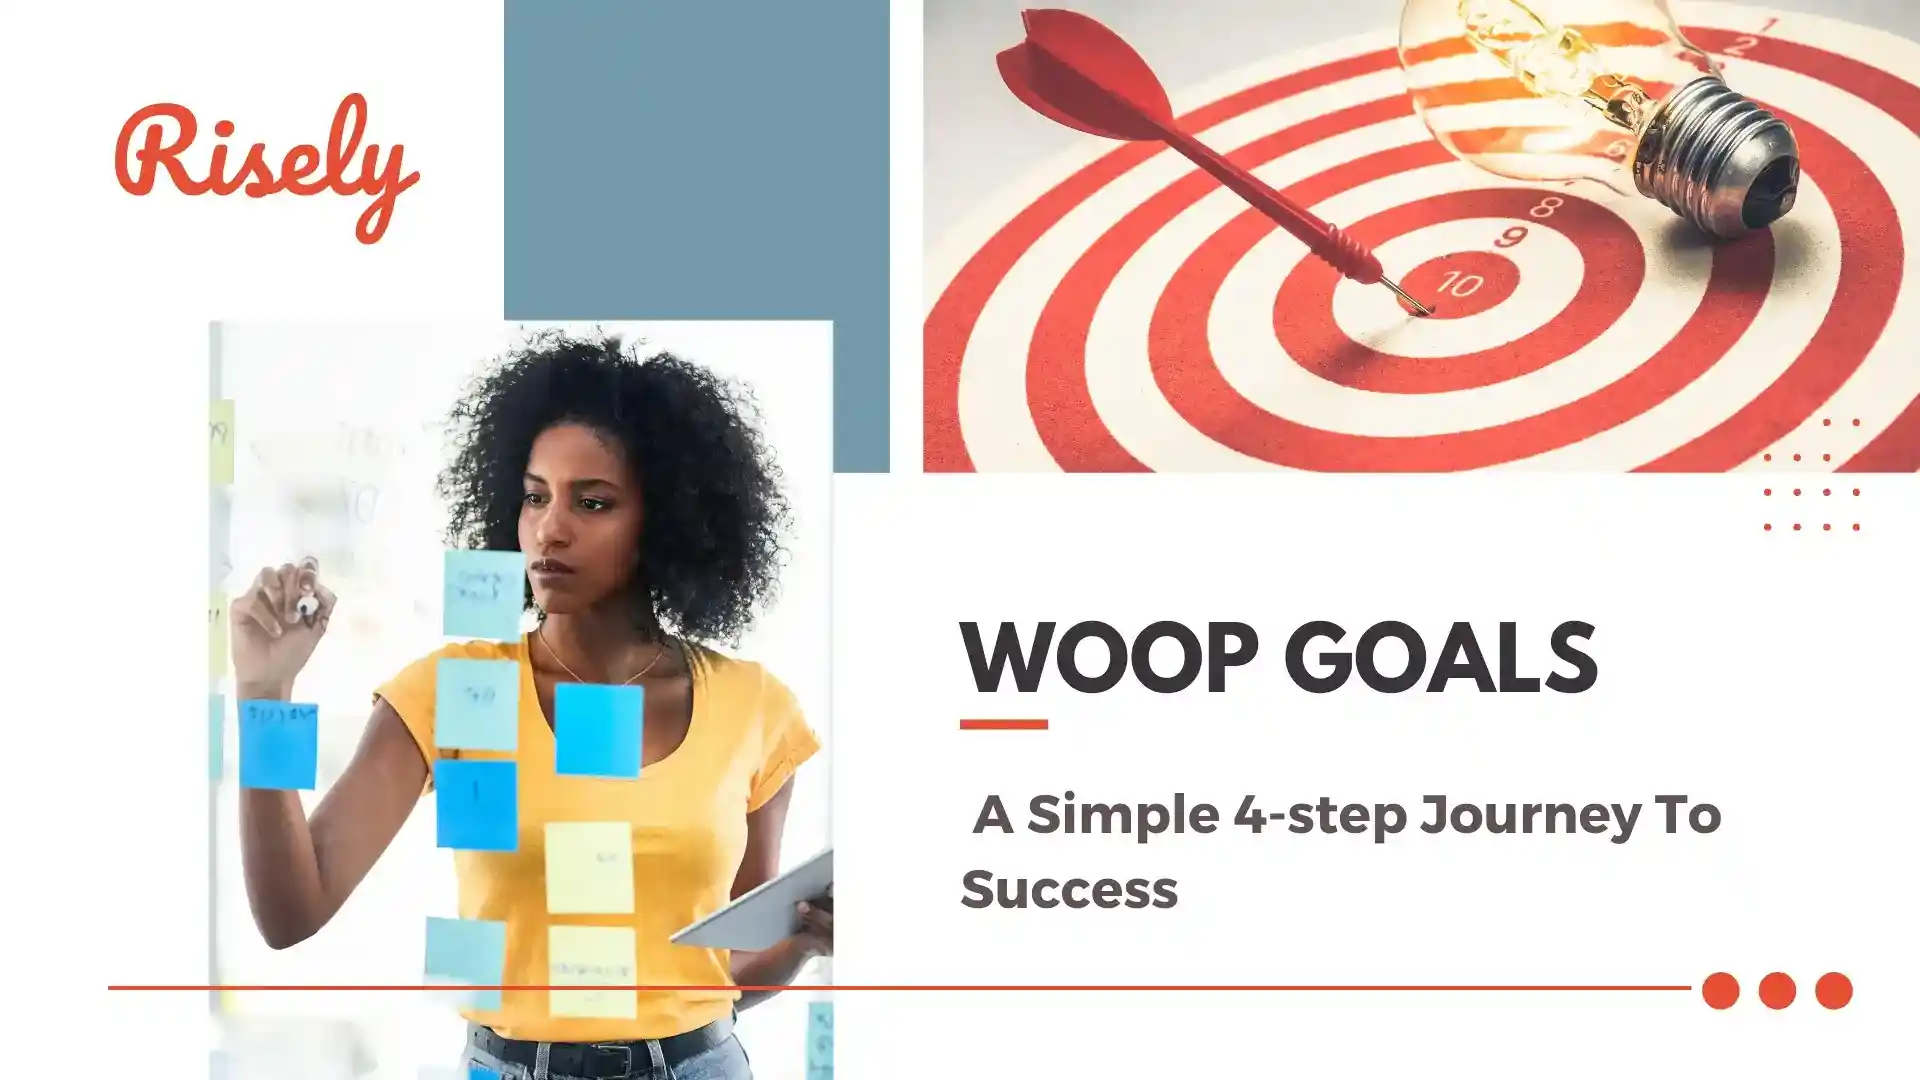 WOOP Goals: A Simple 4-step Journey To Success